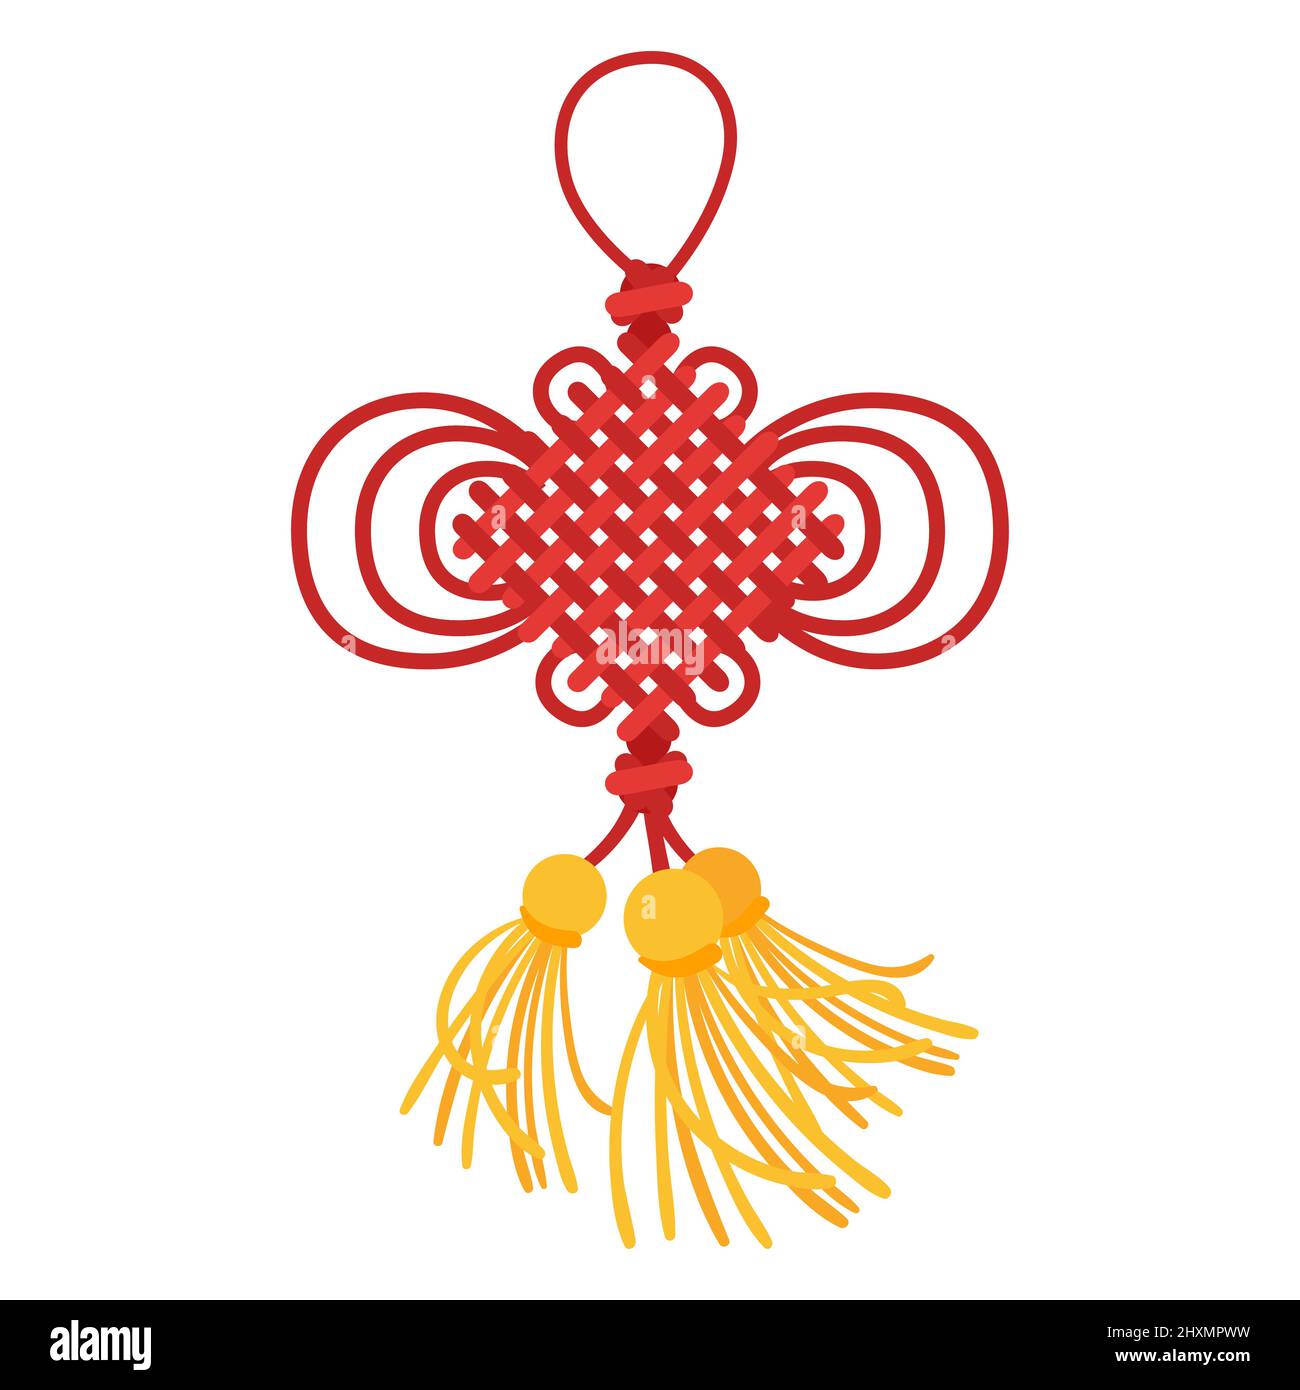 Vector illustration of a traditional China knot Stock Vector